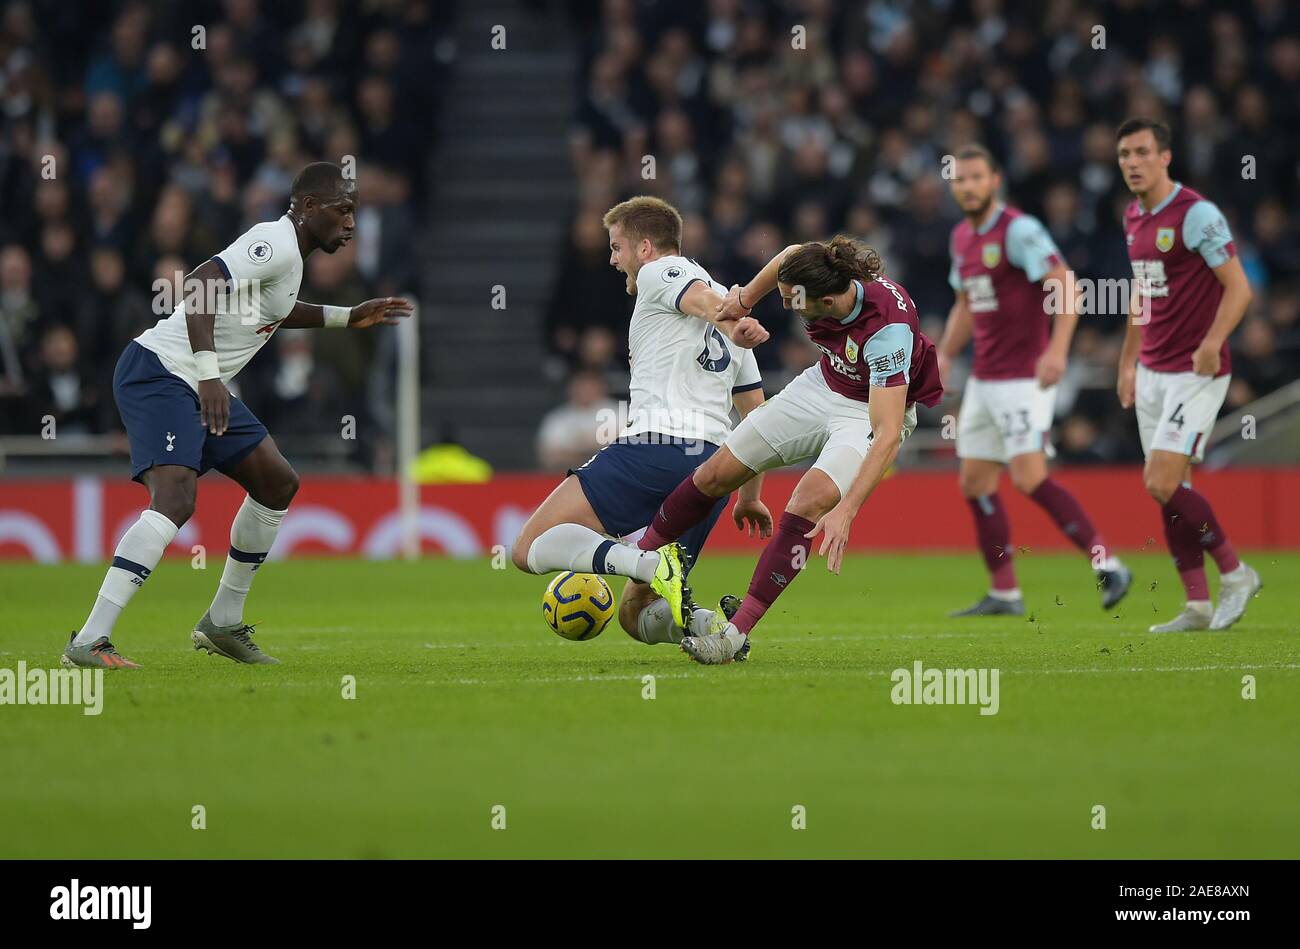 London, UK. 7th December 2019. Eric Dier of Tottenham Hotspurclashes with Jay Rodriguez of Burnley during the Tottenham Hotspur vs Burnley Premier League Football match at the Tottenham Hotspur Stadium on 7th December 2019-EDITORIAL USE ONLY No use with unauthorised audio, video, data, fixture lists (outside the EU), club/league logos or 'live' services. Online in-match use limited to 45 images (+15 in extra time). No use to emulate moving images. No use in betting, games or single club/league/player publications/services- Credit: Martin Dalton/Alamy Live News Stock Photo